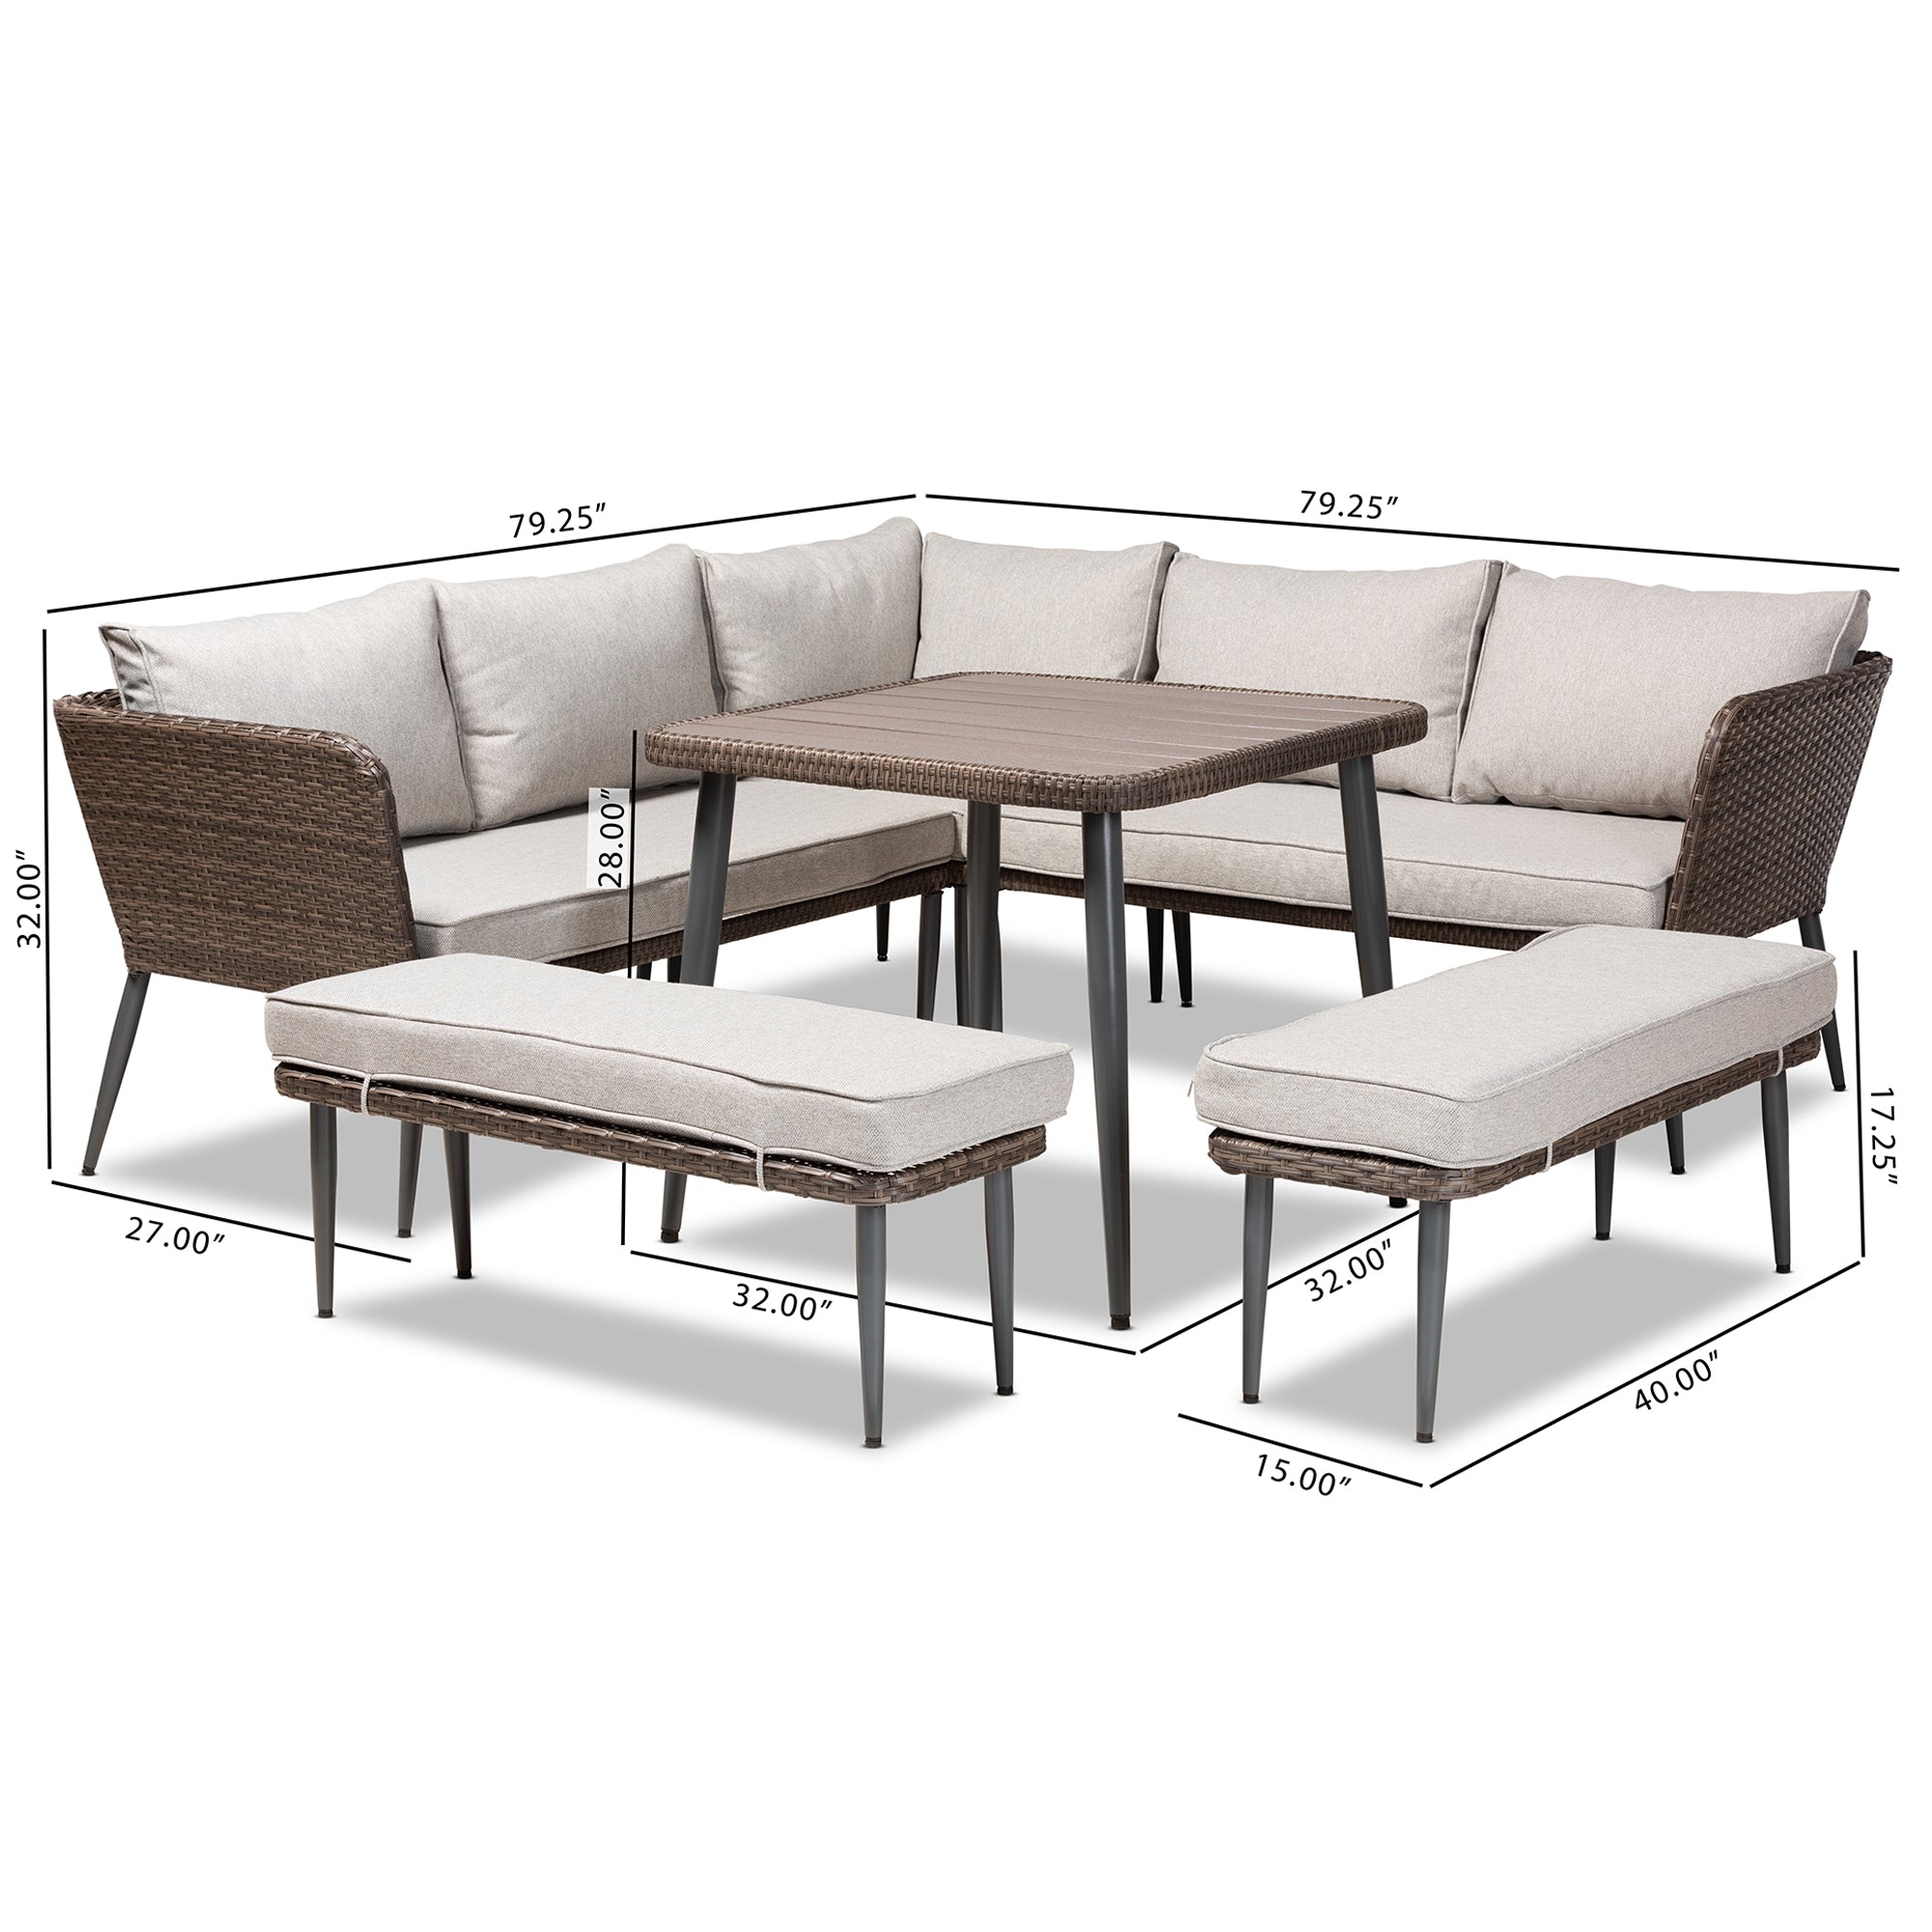 Lillian Modern Sofas & Benches & Table 5-Piece-Outdoor Set-Baxton Studio - WI-Wall2Wall Furnishings